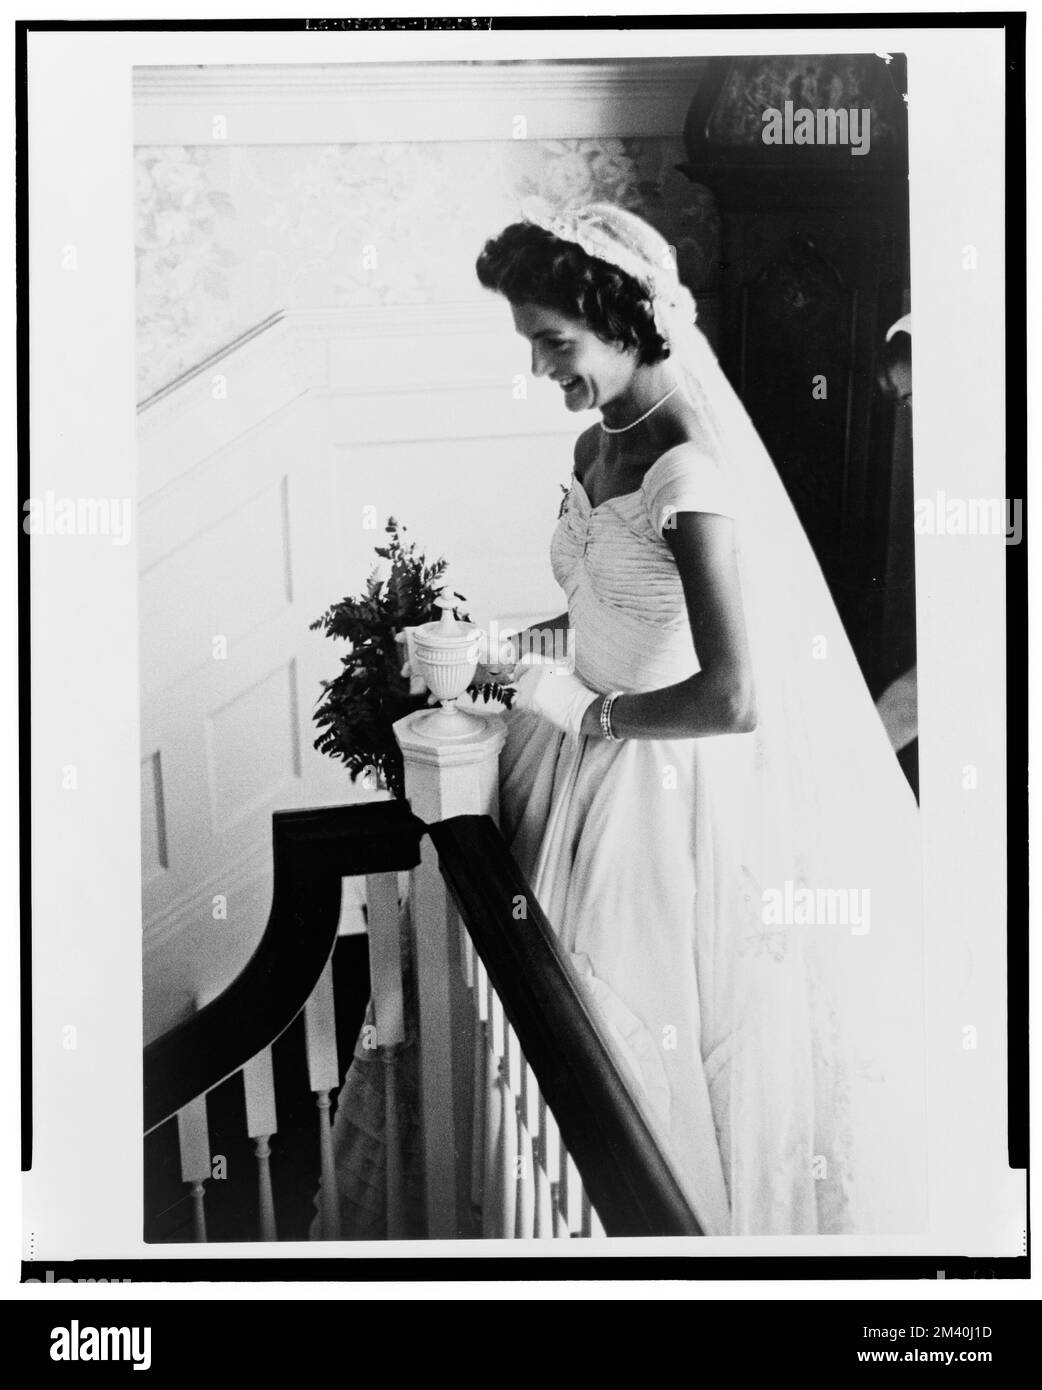 Jacqueline Bouvier, in wedding attire, gazing down from stair landing, Toni Frissell, Antoinette Frissell Bacon, Antoinette Frissell Stock Photo